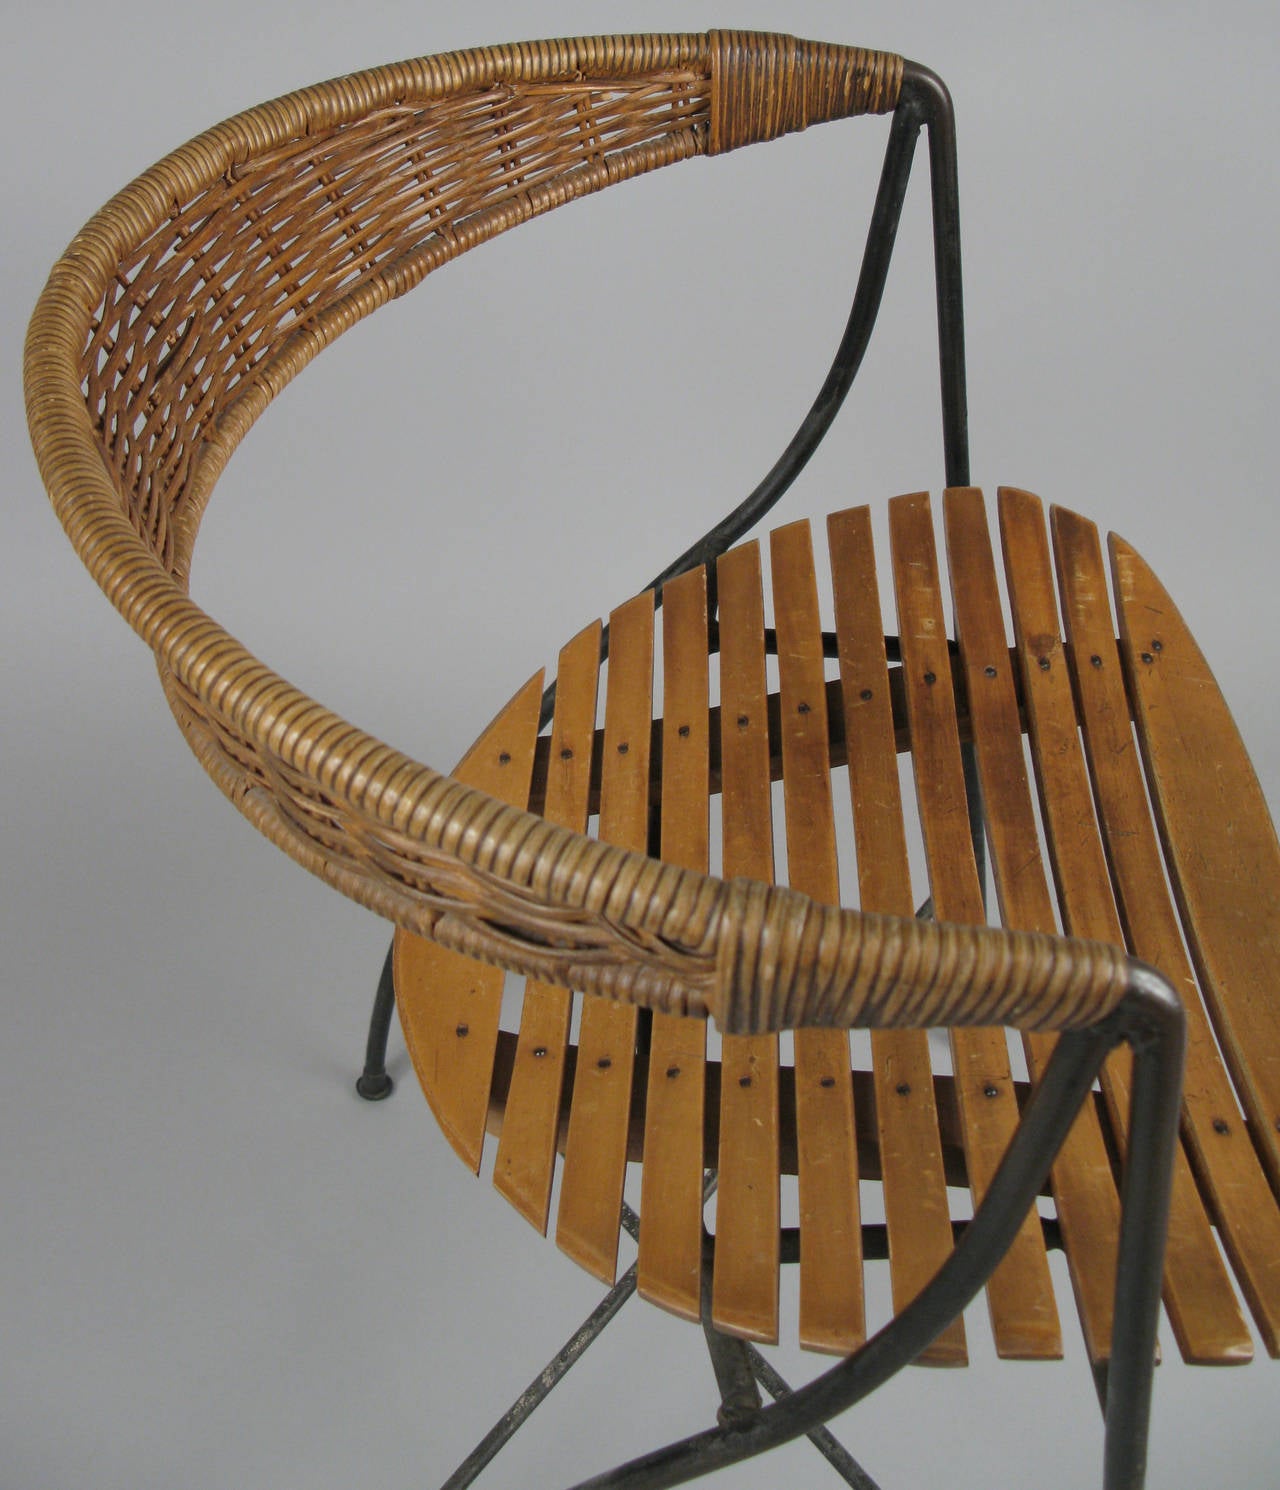 A rare example of Arthur Umanoff beautiful 1950s cane back iron chair. One of his most engaging designs with a sculptural wrought iron frame, curved slat maple seat, and curved and tapered wicker caned back. Original condition with two repairs to